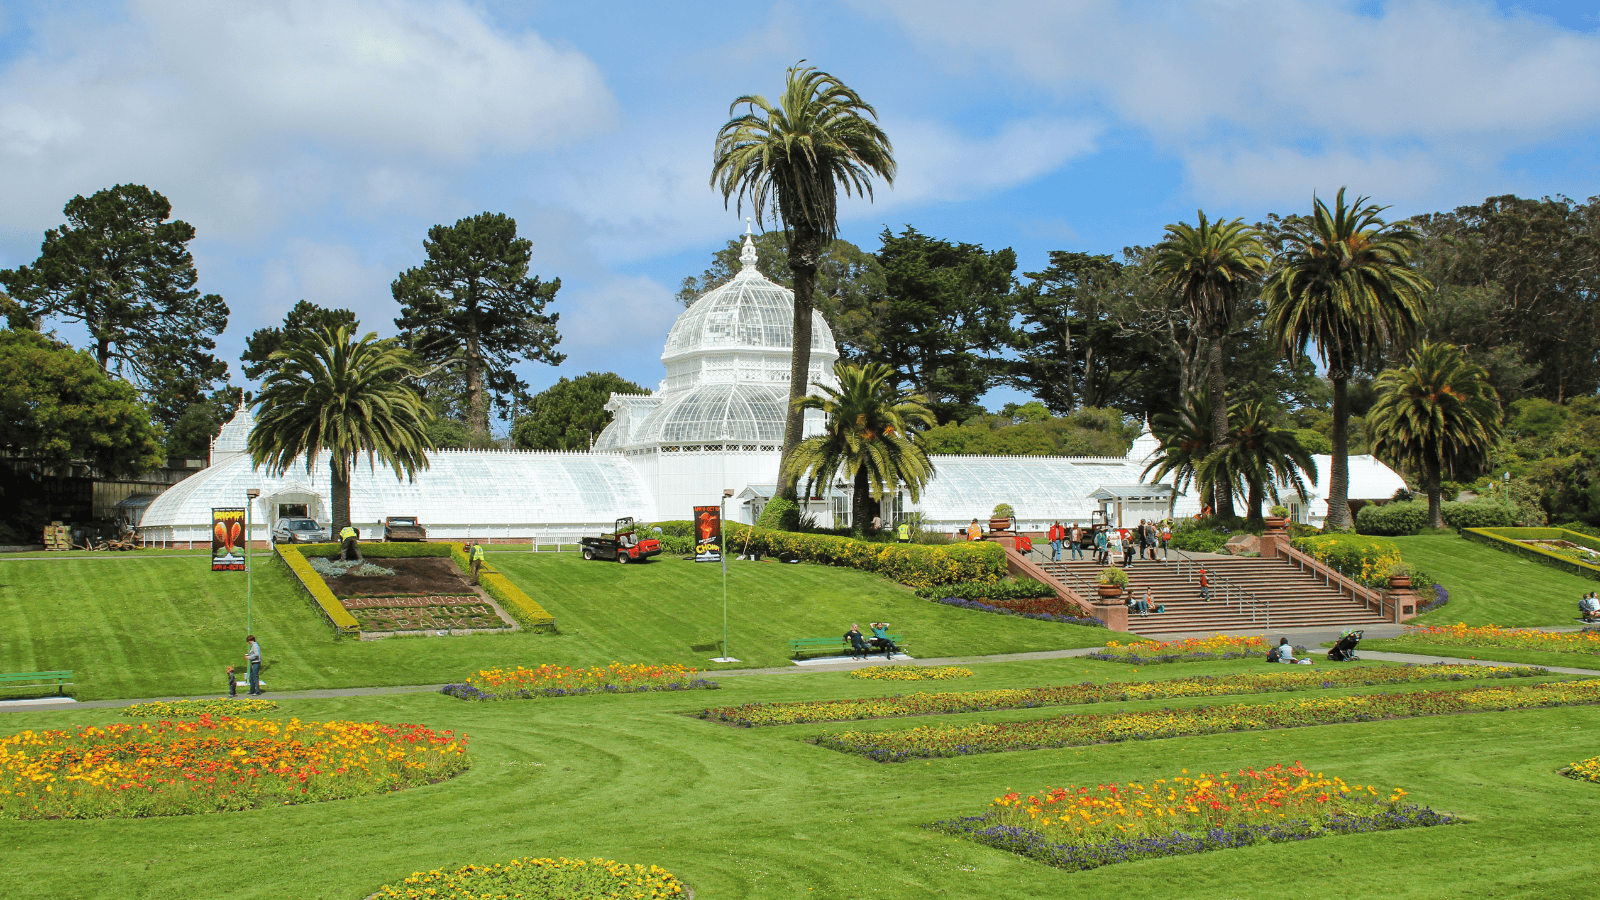 <p>The <a href="https://gggp.org/san-francisco-botanical-garden/" rel="nofollow external noopener noreferrer">San Francisco Botanical Garden</a> is a calmer alternative to the bustling city center. Located in Golden Gate Park, the expertly landscaped garden showcases international plants in a wondrous display. Experience the beauty of regions like the Mediterranean and Southeast Asia without leaving California. </p>